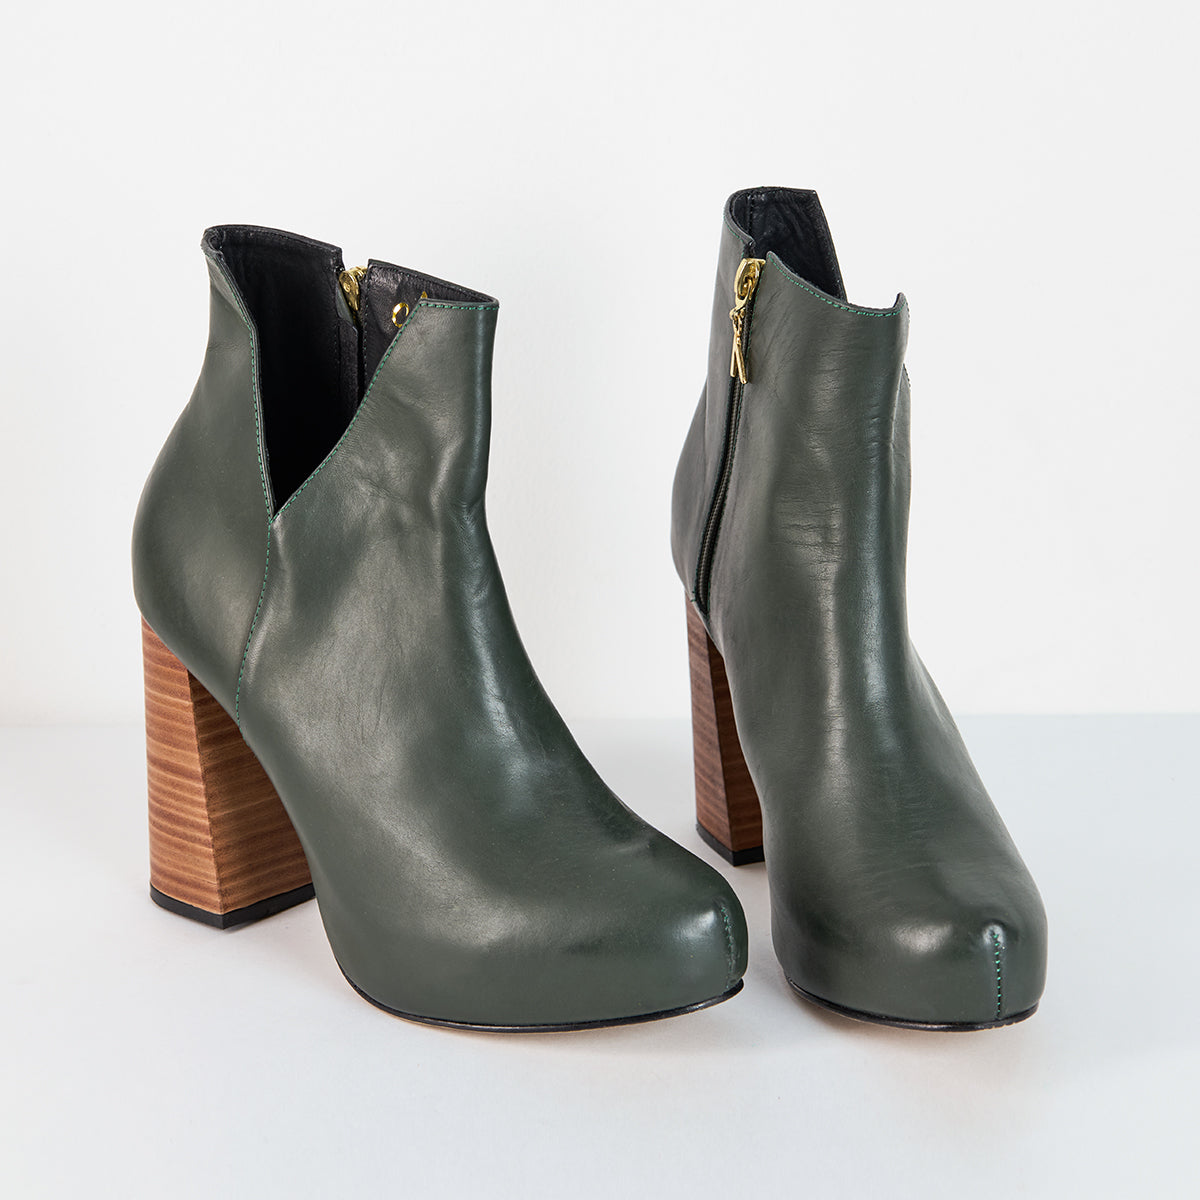 Duran ankle boots - Size 39